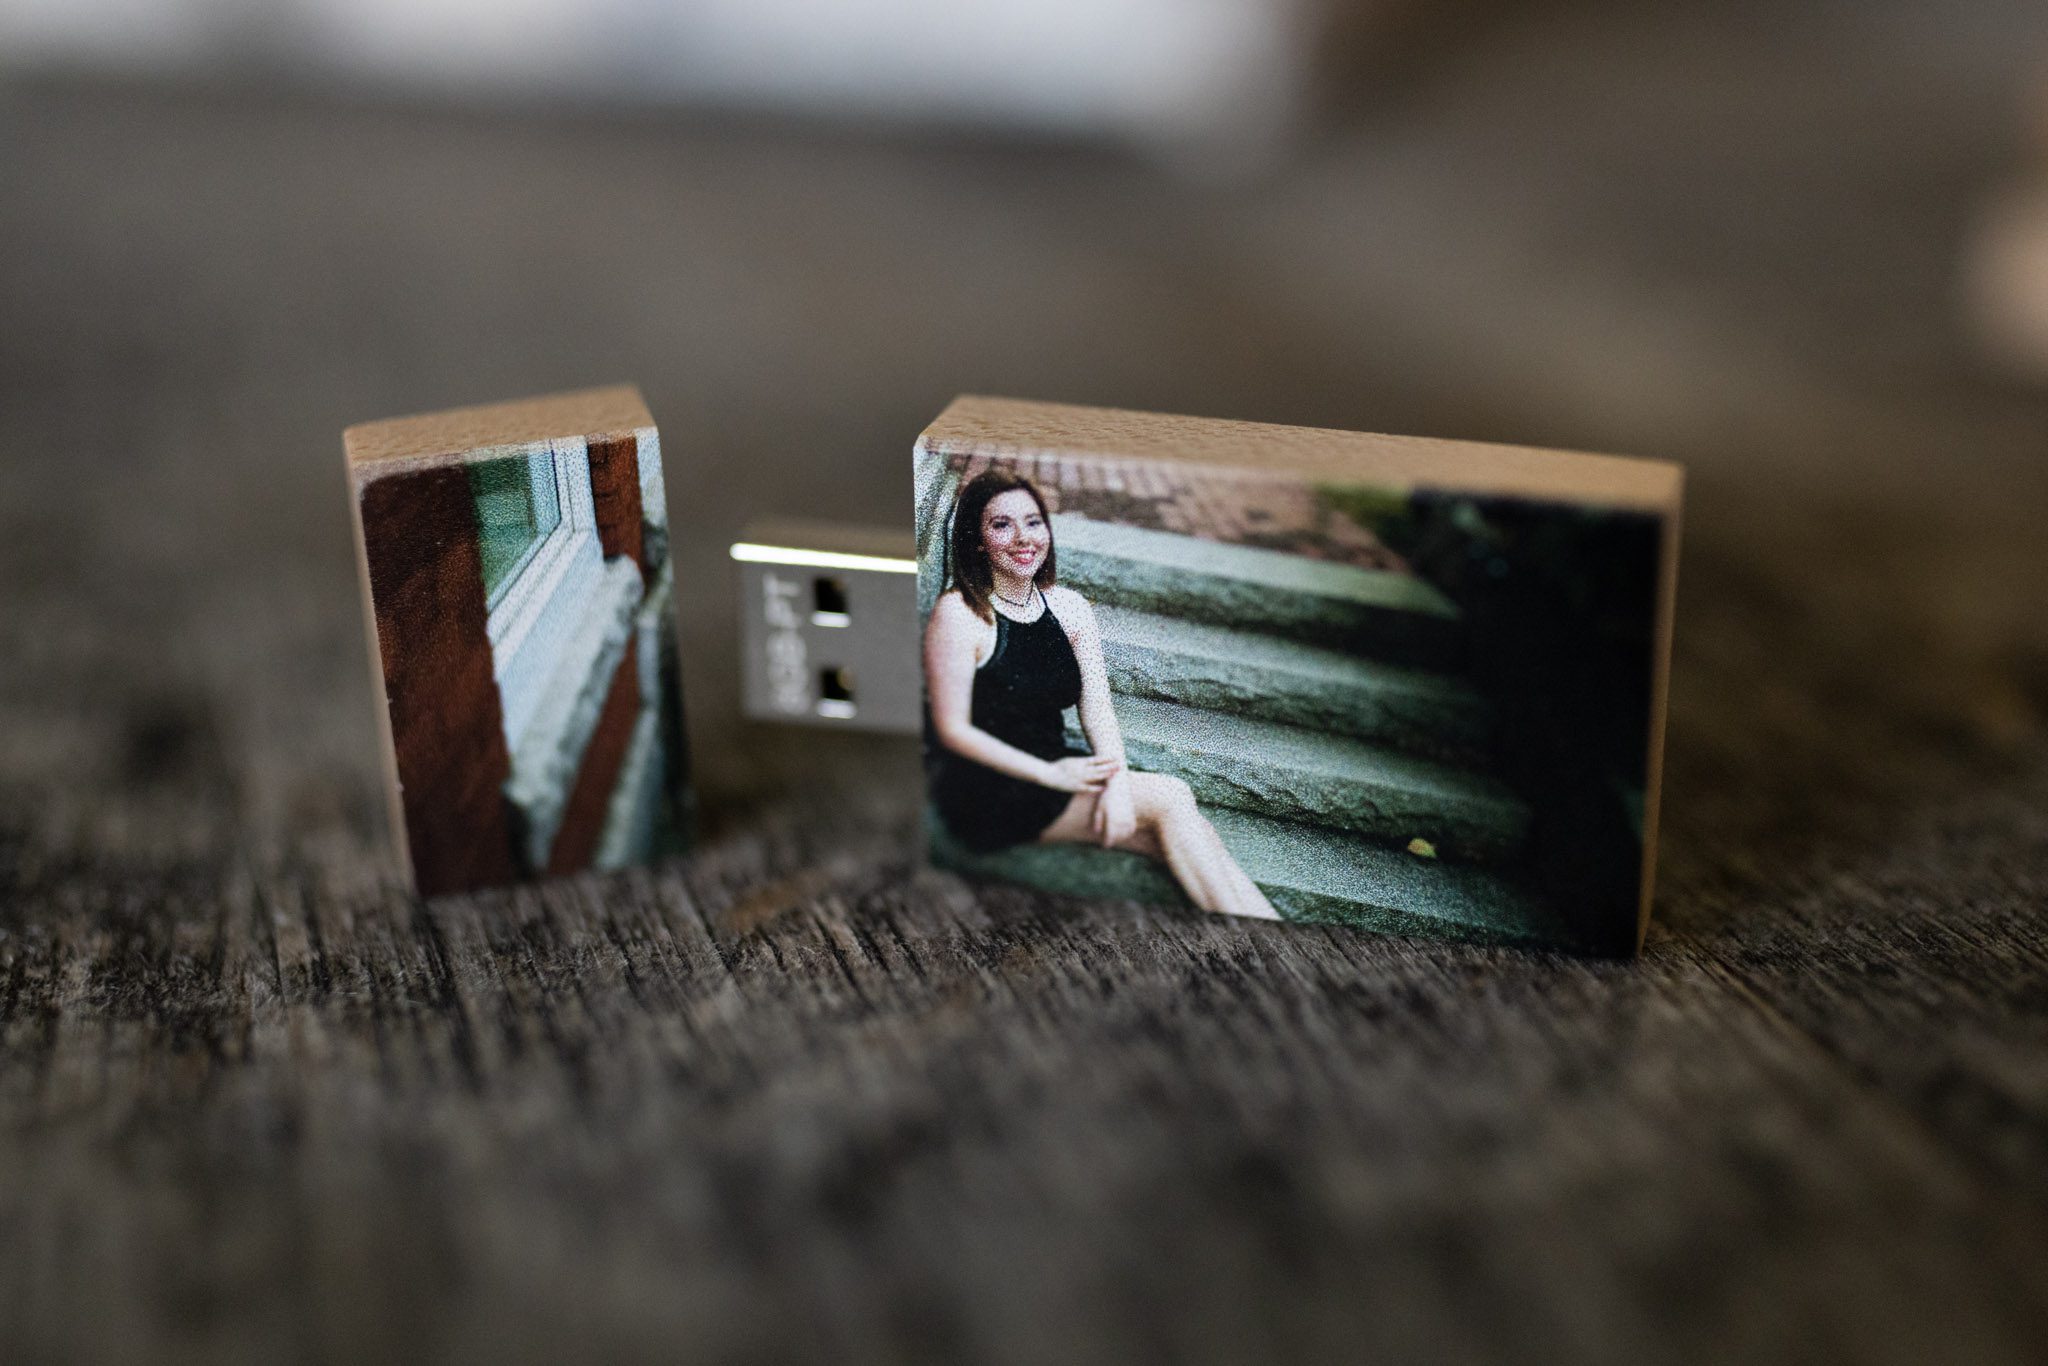 Custom printed USB thumb drive for high school senior portraits photographed by Sean Wytrwal of J&S Photography in Massachusetts